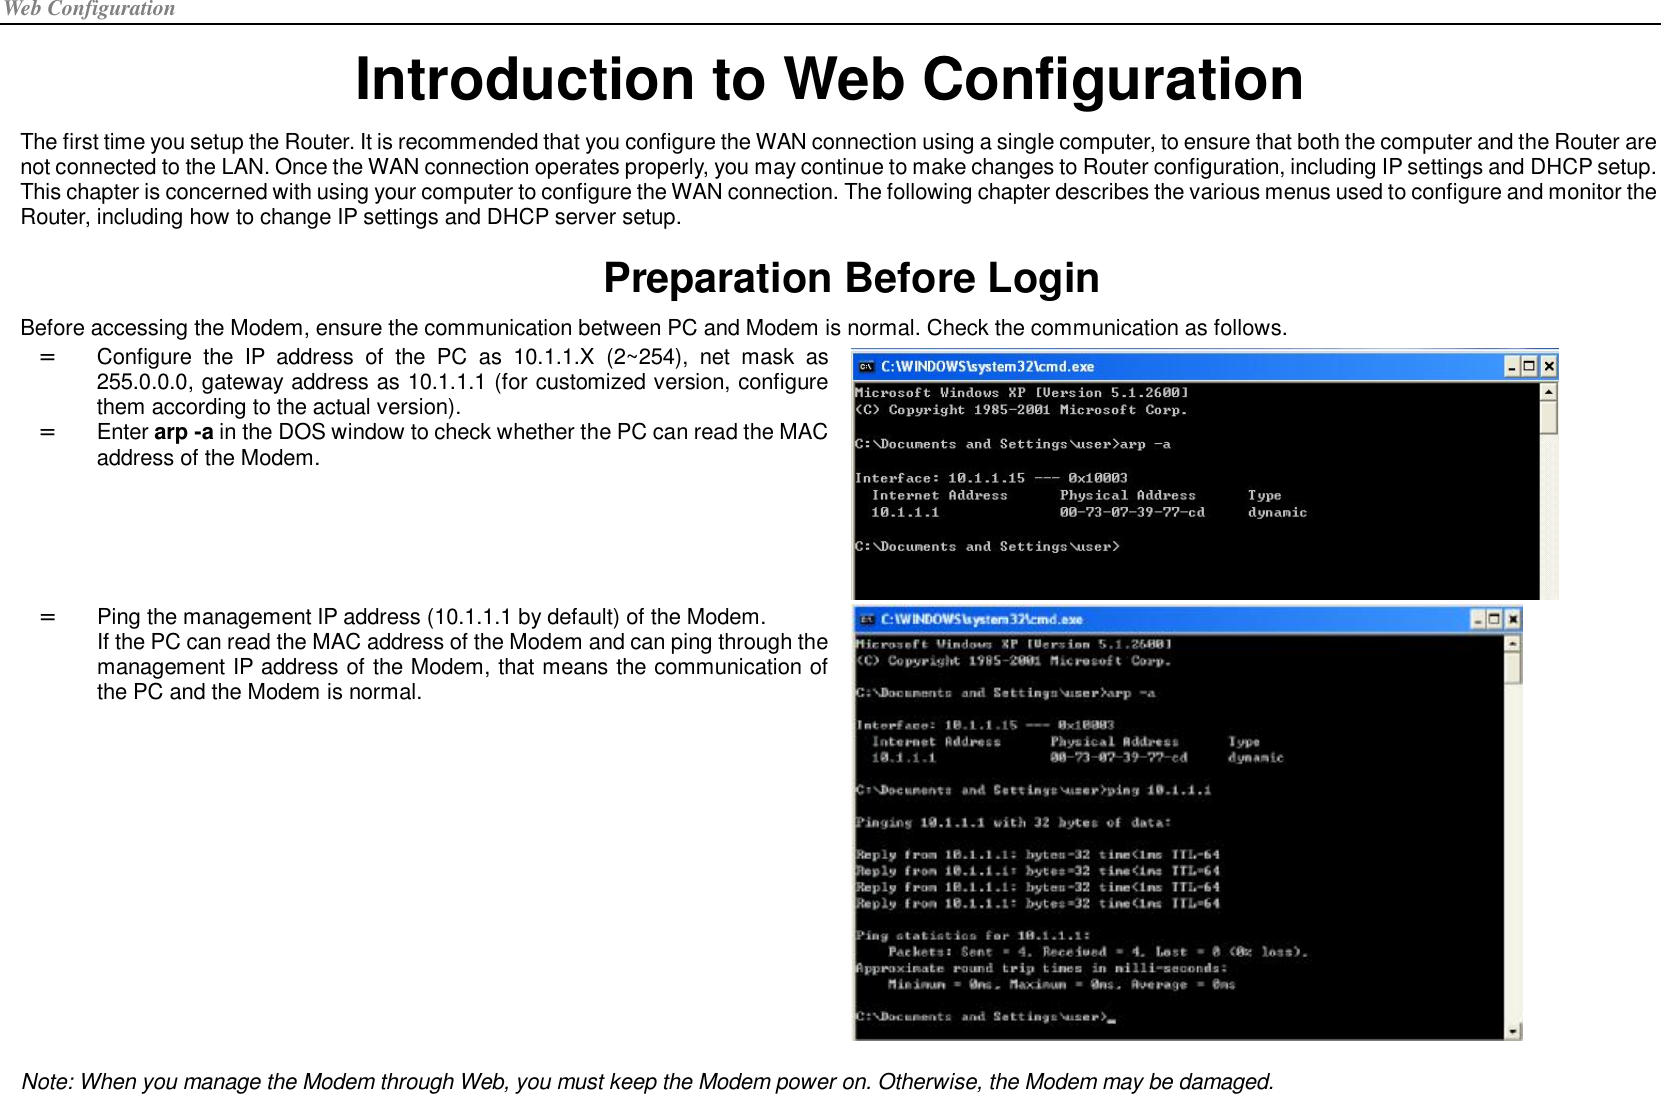 Web Configuration Introduction to Web Configuration The first time you setup the Router. It is recommended that you configure the WAN connection using a single computer, to ensure that both the computer and the Router are not connected to the LAN. Once the WAN connection operates properly, you may continue to make changes to Router configuration, including IP settings and DHCP setup. This chapter is concerned with using your computer to configure the WAN connection. The following chapter describes the various menus used to configure and monitor the Router, including how to change IP settings and DHCP server setup. Preparation Before Login Before accessing the Modem, ensure the communication between PC and Modem is normal. Check the communication as follows. =  Configure the IP address of the PC as 10.1.1.X (2~254), net mask as 255.0.0.0, gateway address as 10.1.1.1 (for customized version, configure them according to the actual version). =  Enter arp -a in the DOS window to check whether the PC can read the MAC address of the Modem.  =  Ping the management IP address (10.1.1.1 by default) of the Modem. If the PC can read the MAC address of the Modem and can ping through the management IP address of the Modem, that means the communication of the PC and the Modem is normal.   Note: When you manage the Modem through Web, you must keep the Modem power on. Otherwise, the Modem may be damaged.